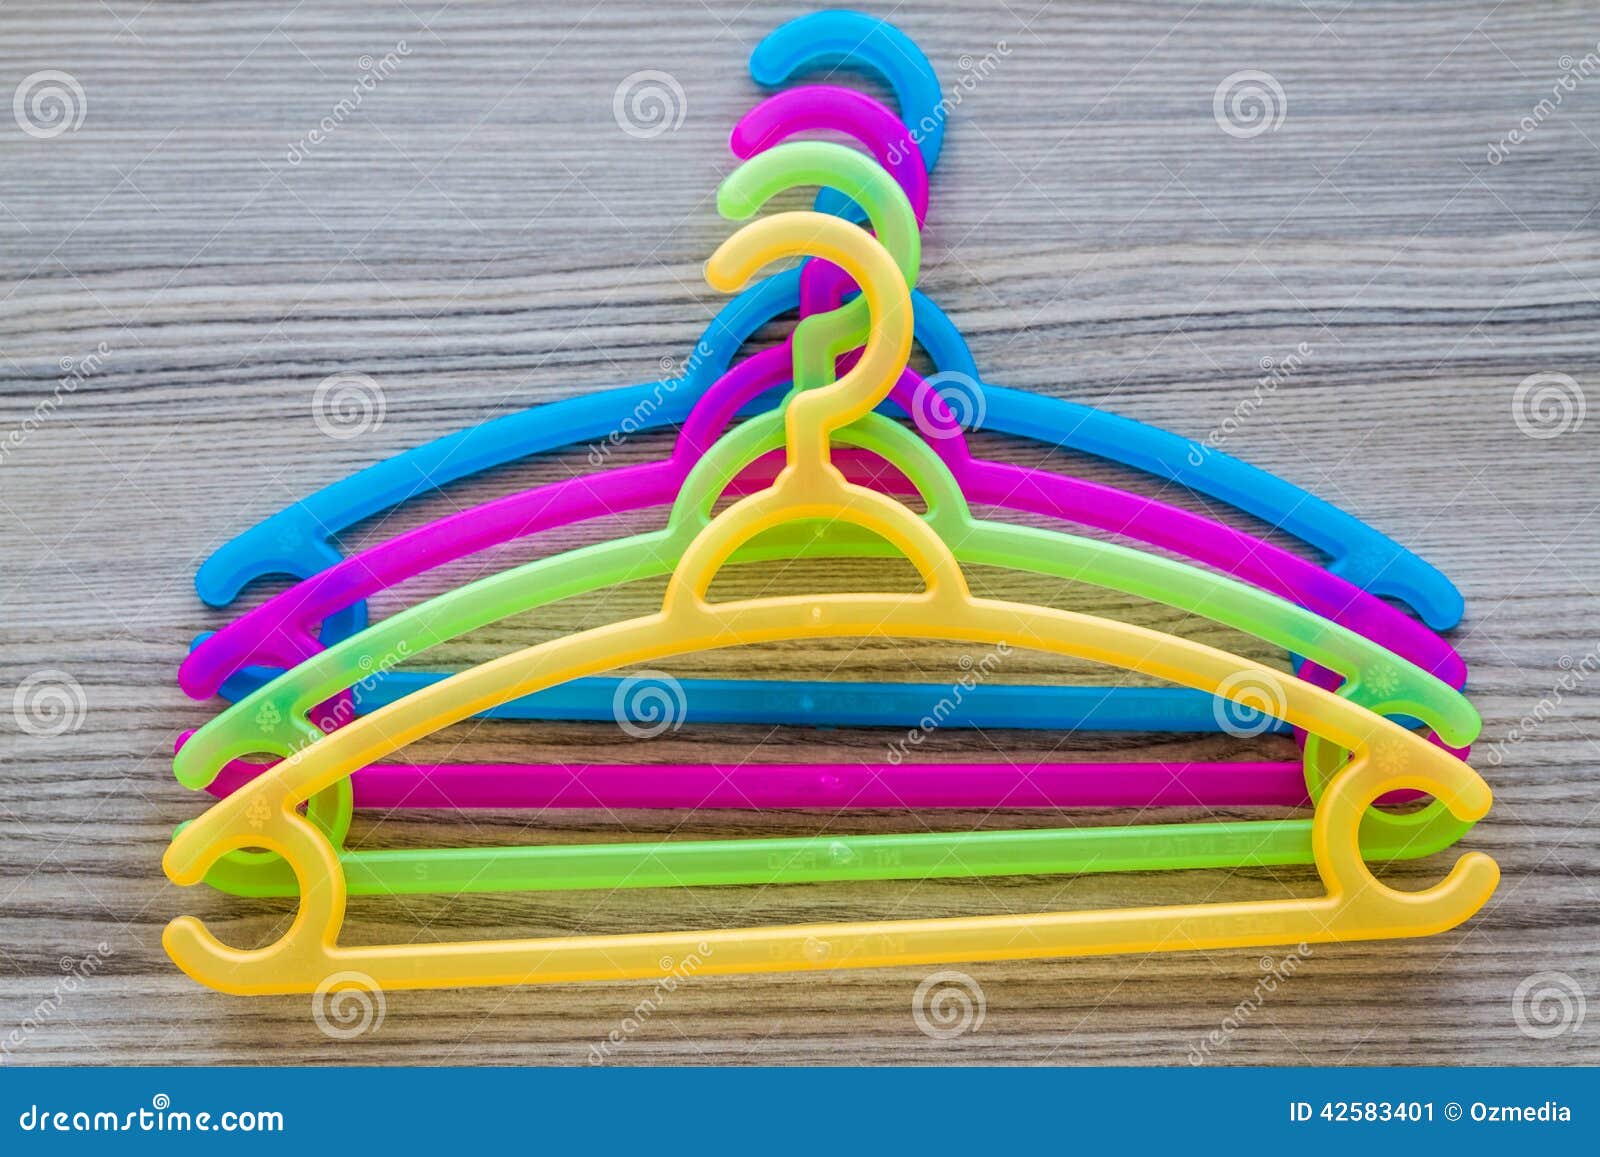 Colorful Clothes Hanger. Colorful modern plastic clothes hanger on a wooden background